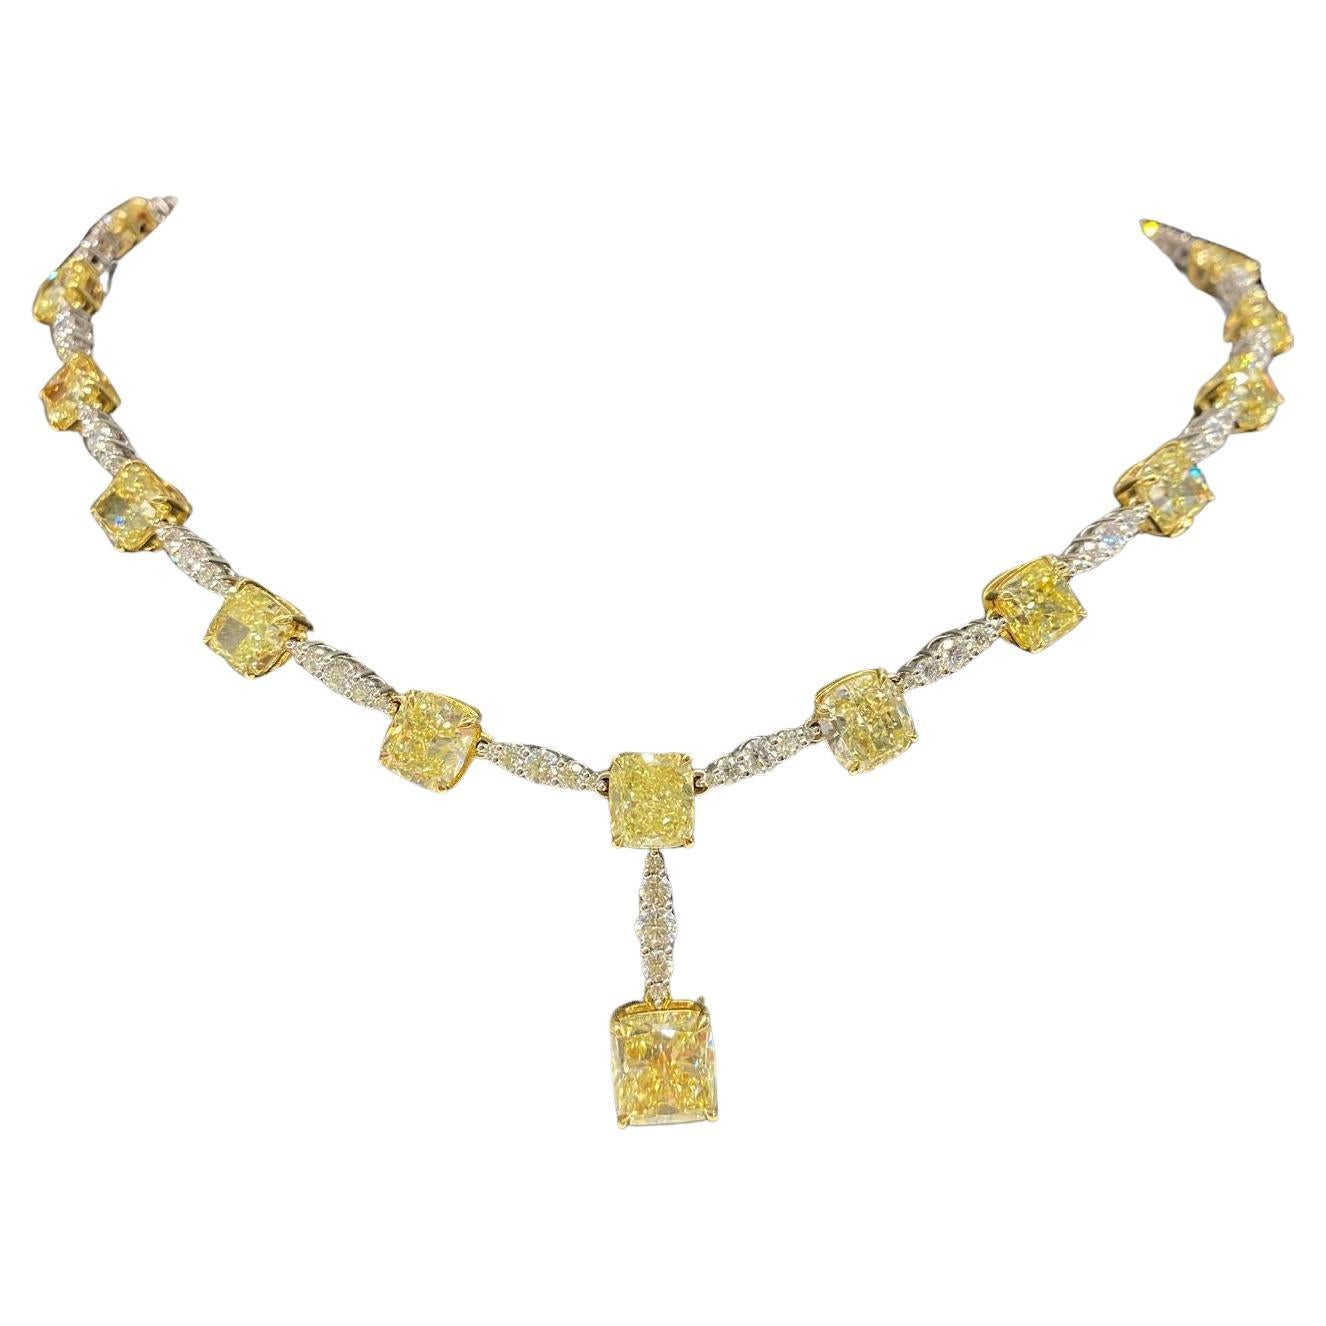  Luxurious Fancy Yellow Necklace with a Stunning 4ct Center Diamond!

Elevate your style with this exquisite necklace, crafted to perfection with unparalleled attention to detail.

Key Features:

Centerpiece Brilliance: At the heart of this necklace